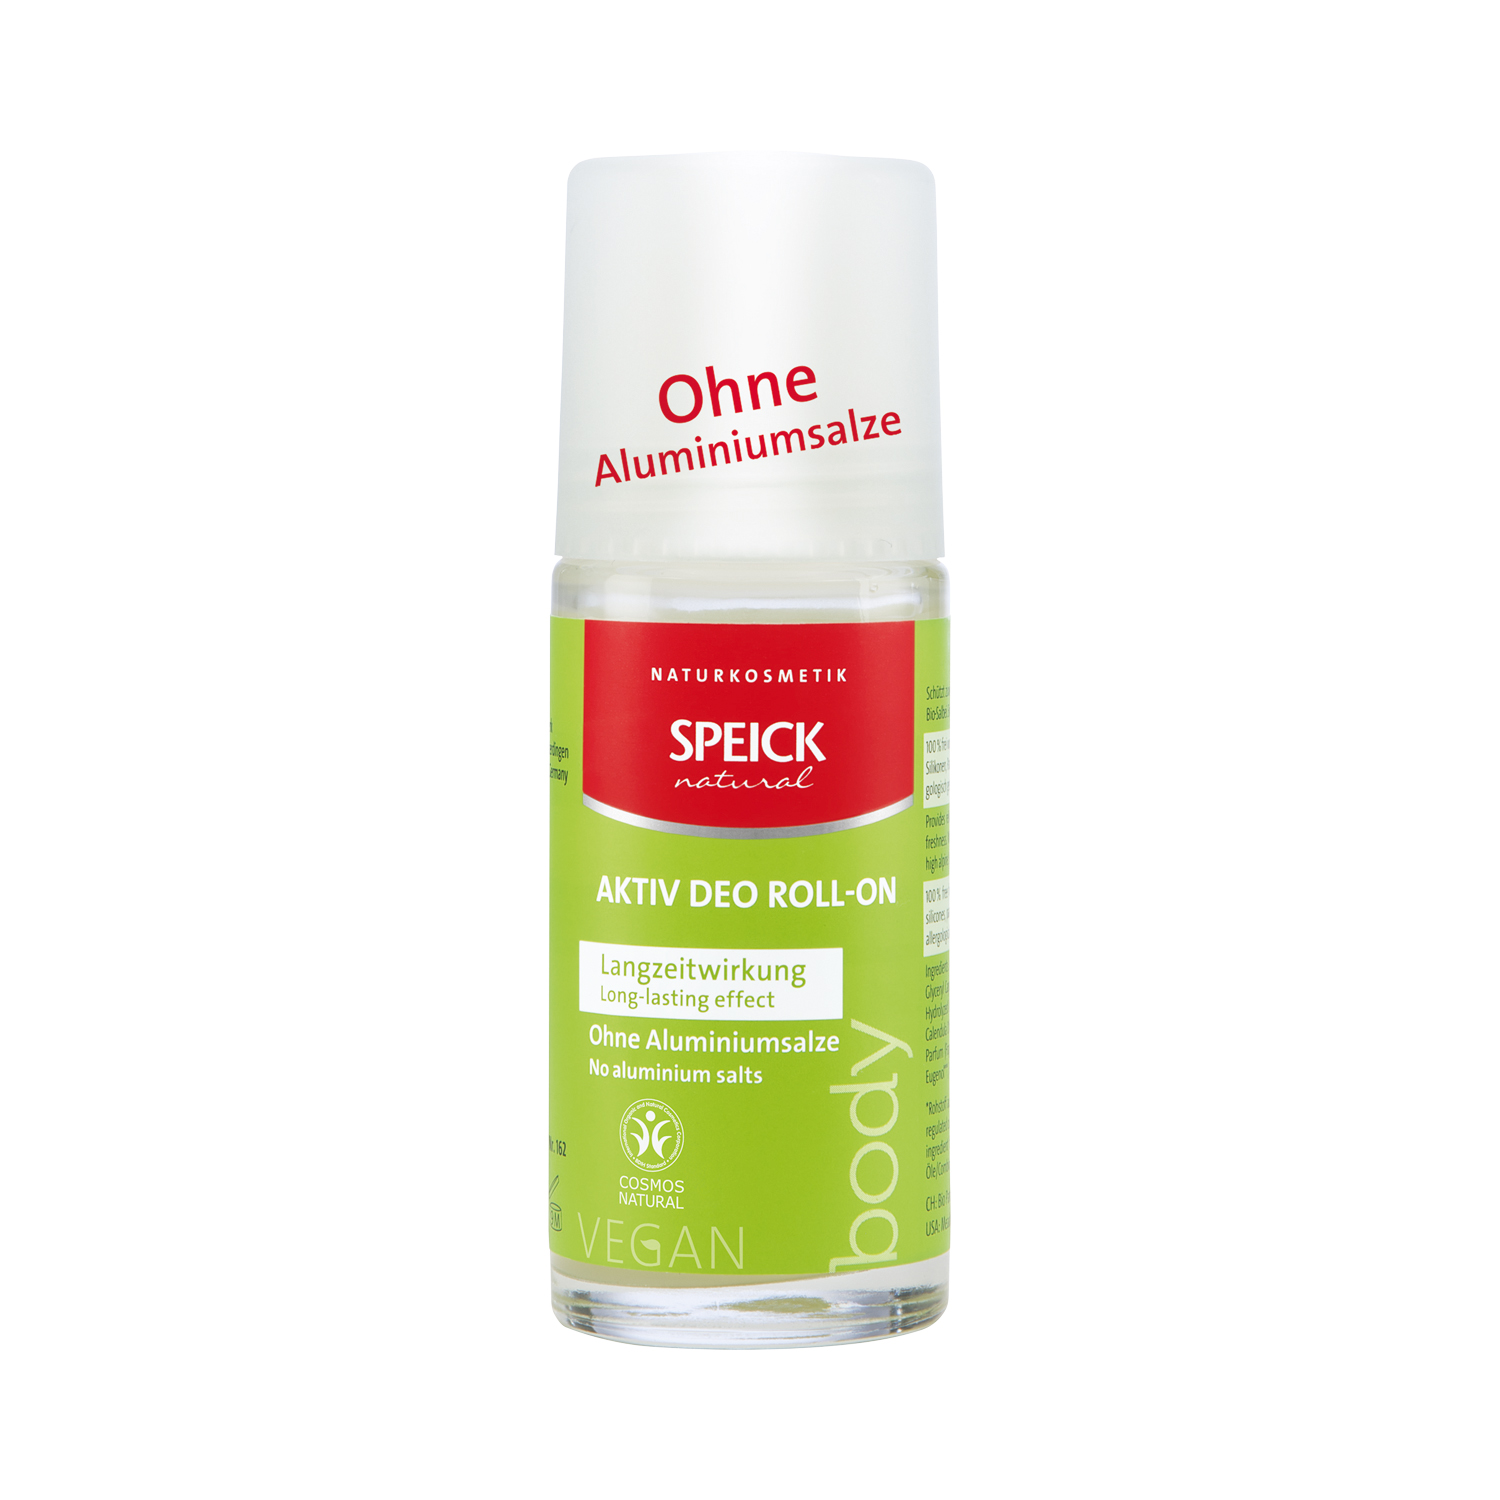 Speick - Natural Aktiv - Deo Roll-on